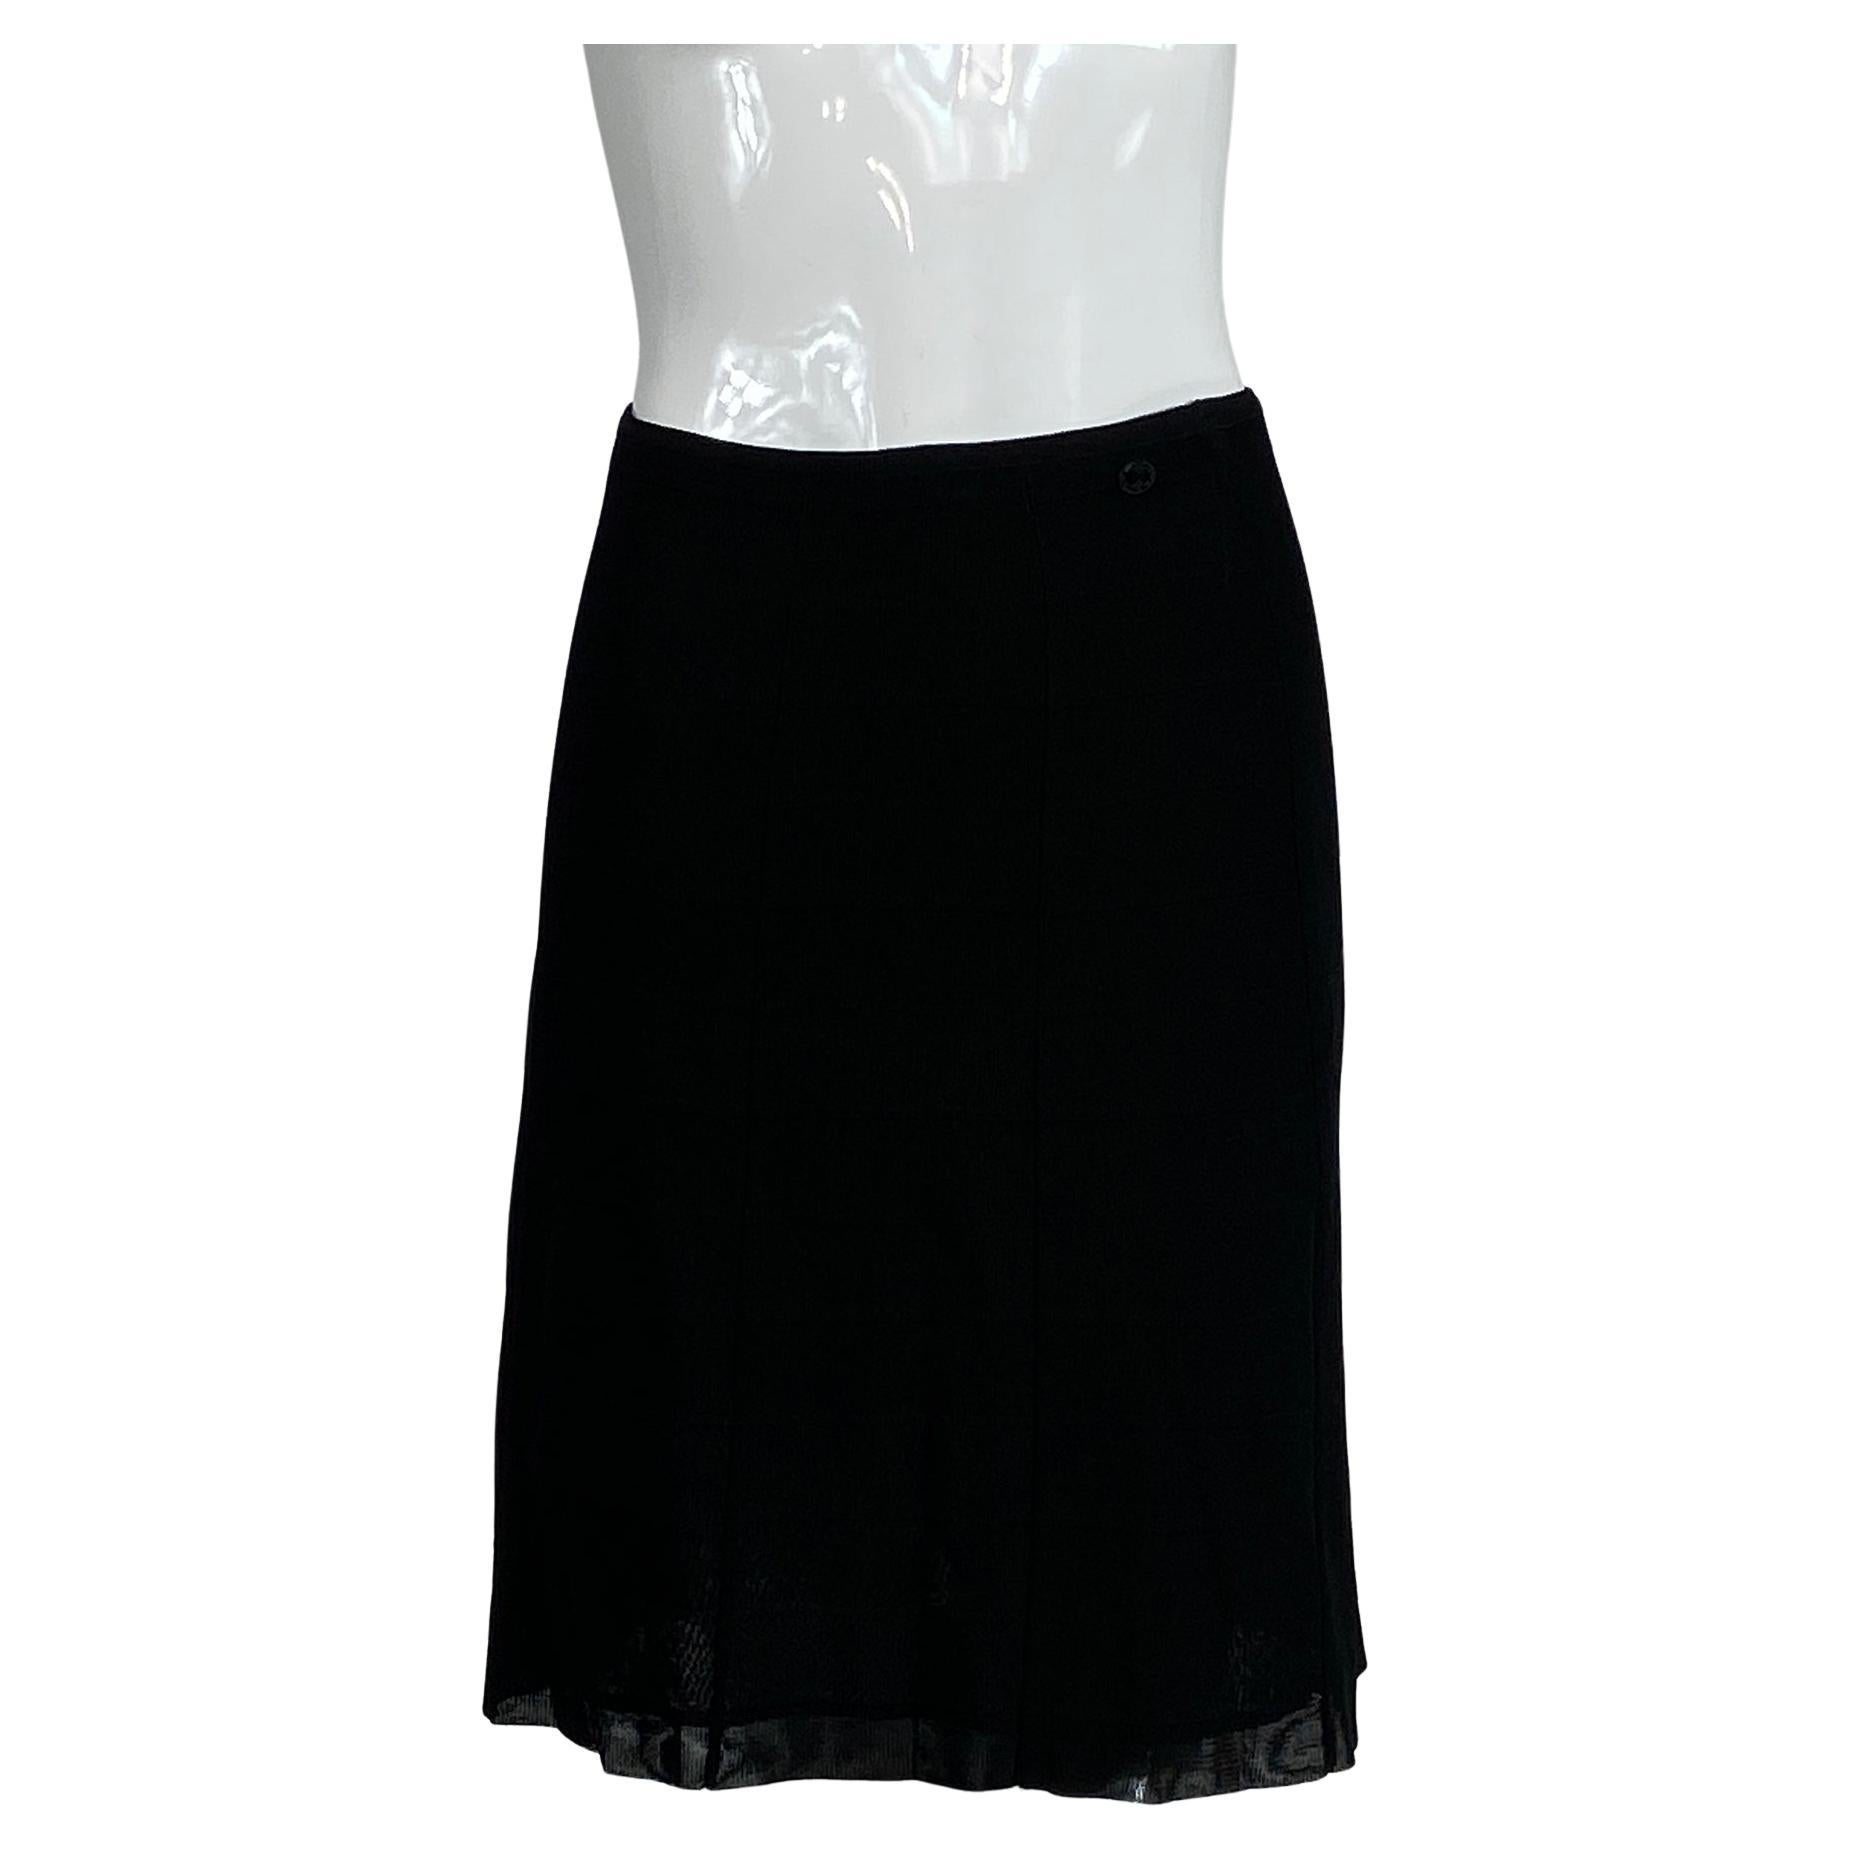 Chanel 07C black gored rib knit skirt. Pull on skirt, with a cased elastic waist band and a Chanel black logo sewn at the waist side front. Seamed gored skirt with a horizontal band knit pattern. The skirt is lined in black mesh. Marked size 36. 
  